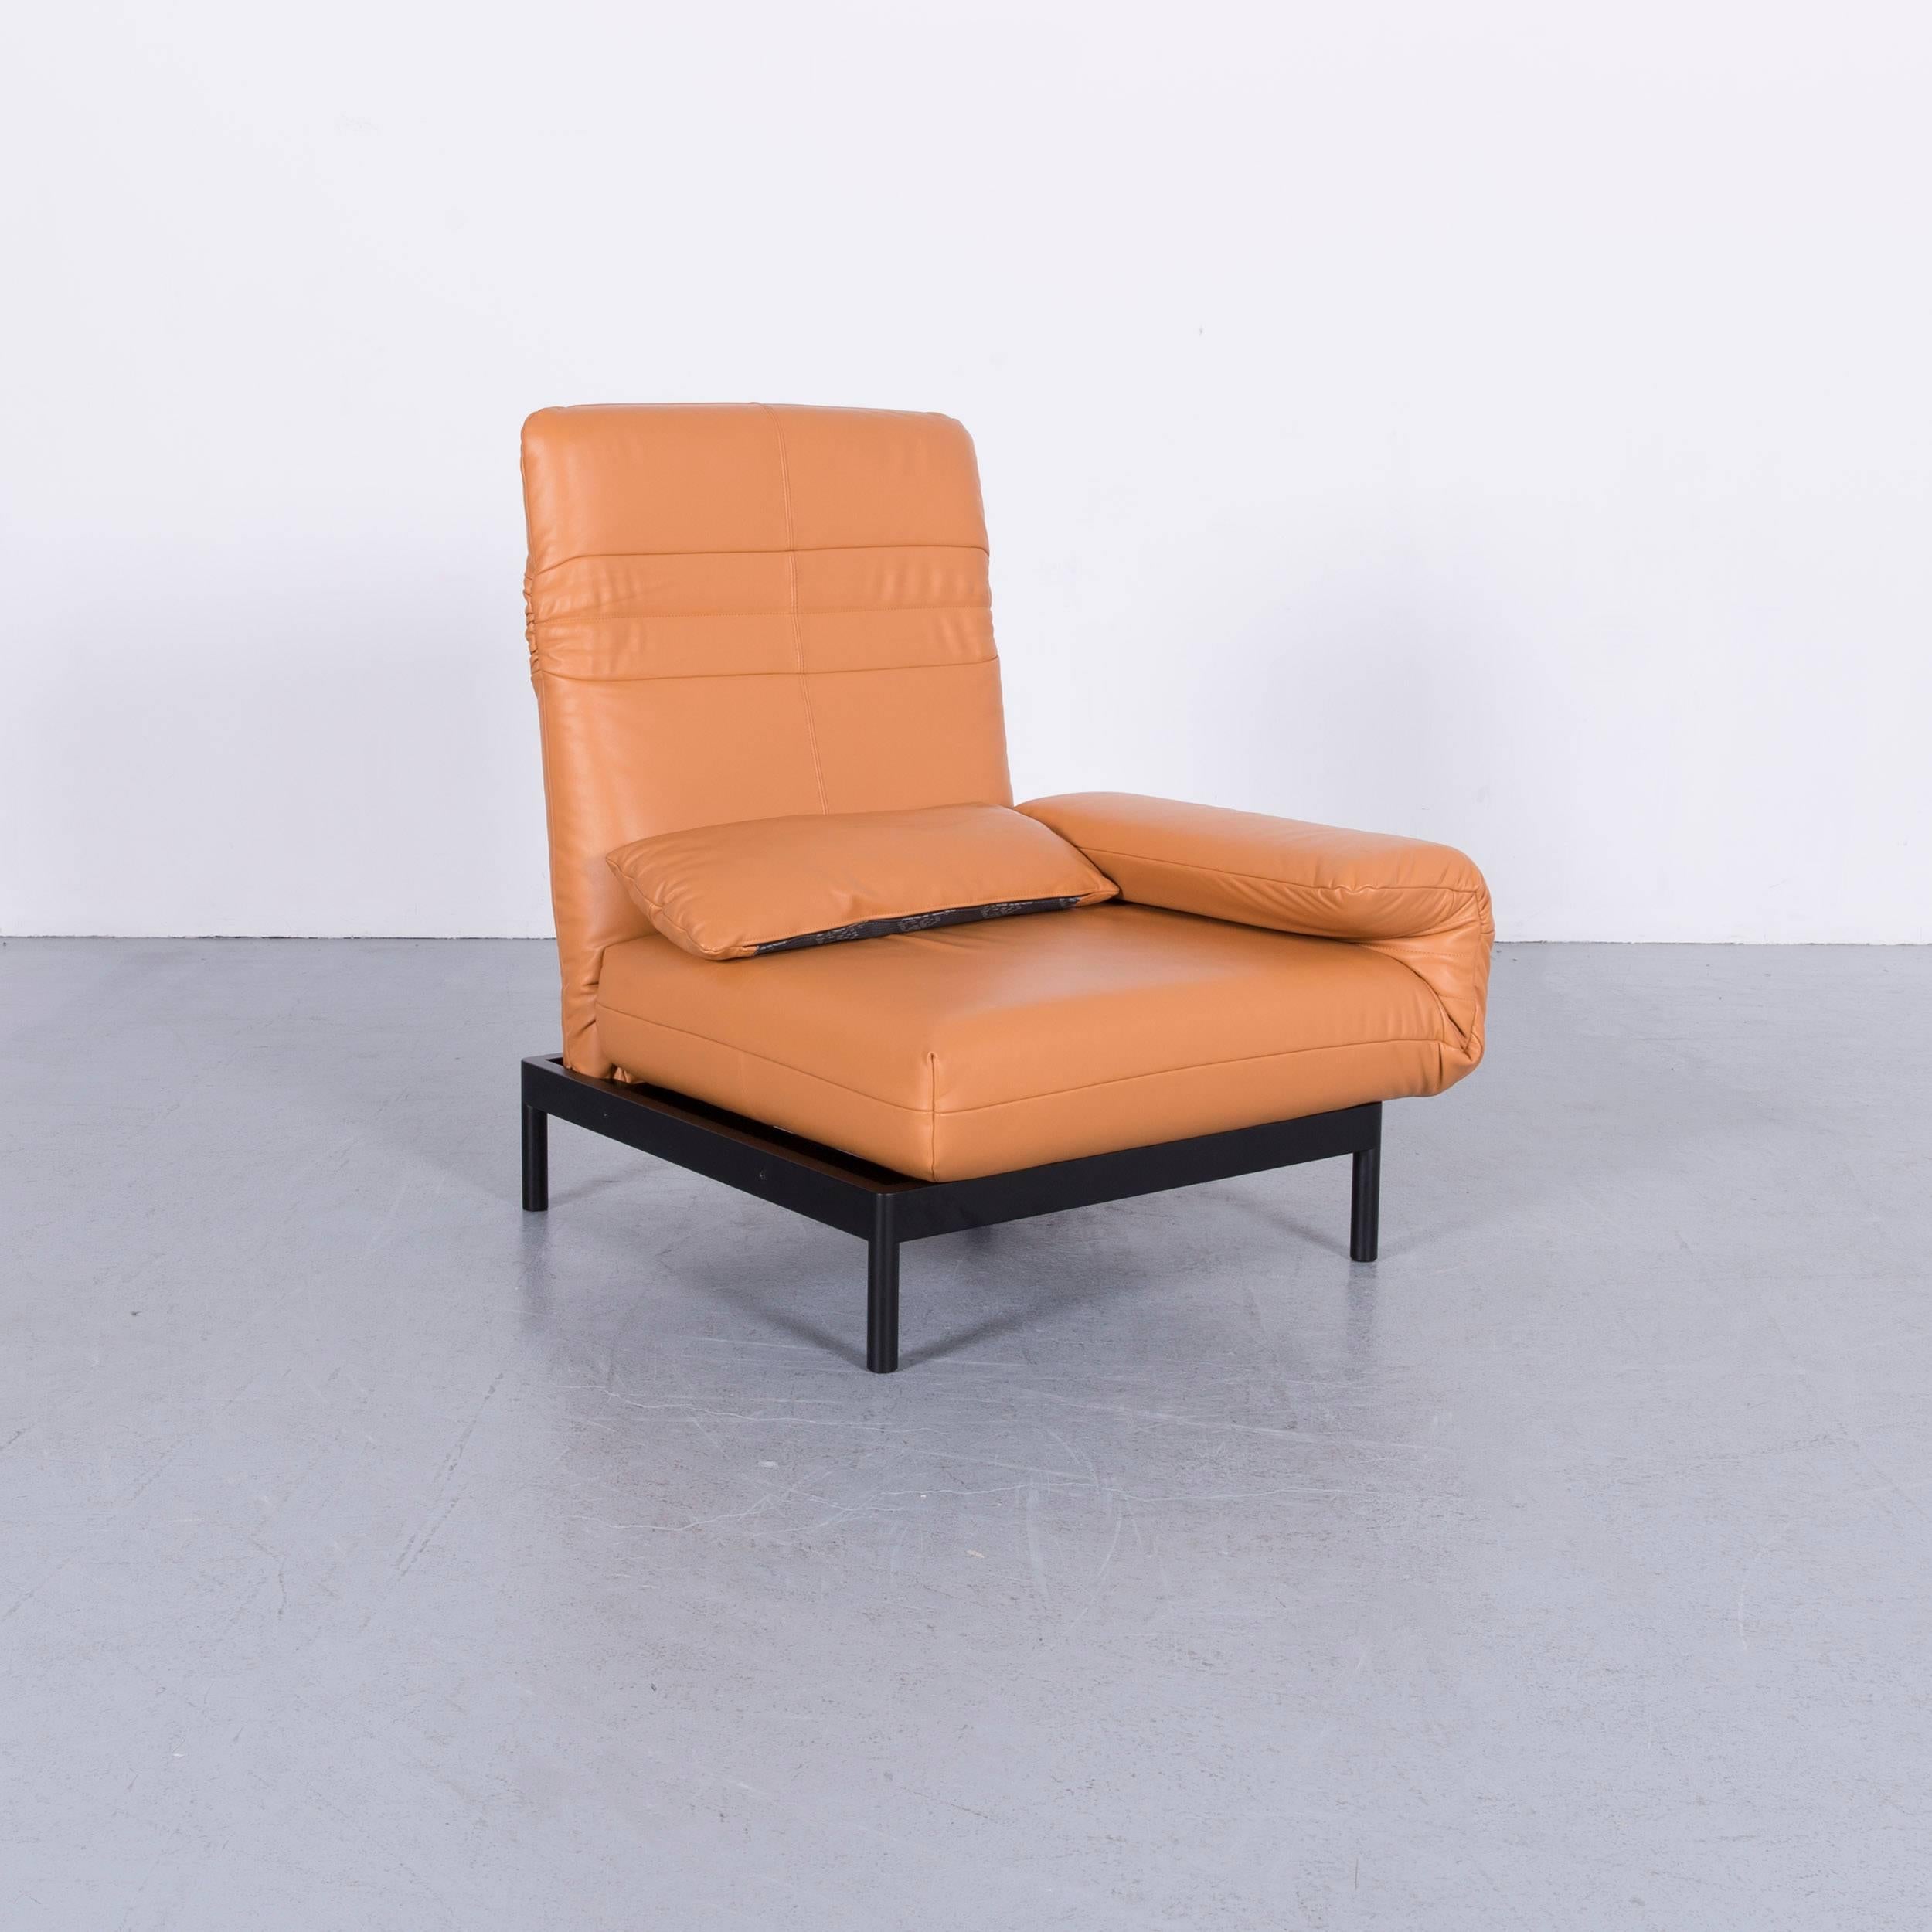 Contemporary Rolf Benz Plura Designer Sofa Leather Orange Yellow Red Armchairs For Sale